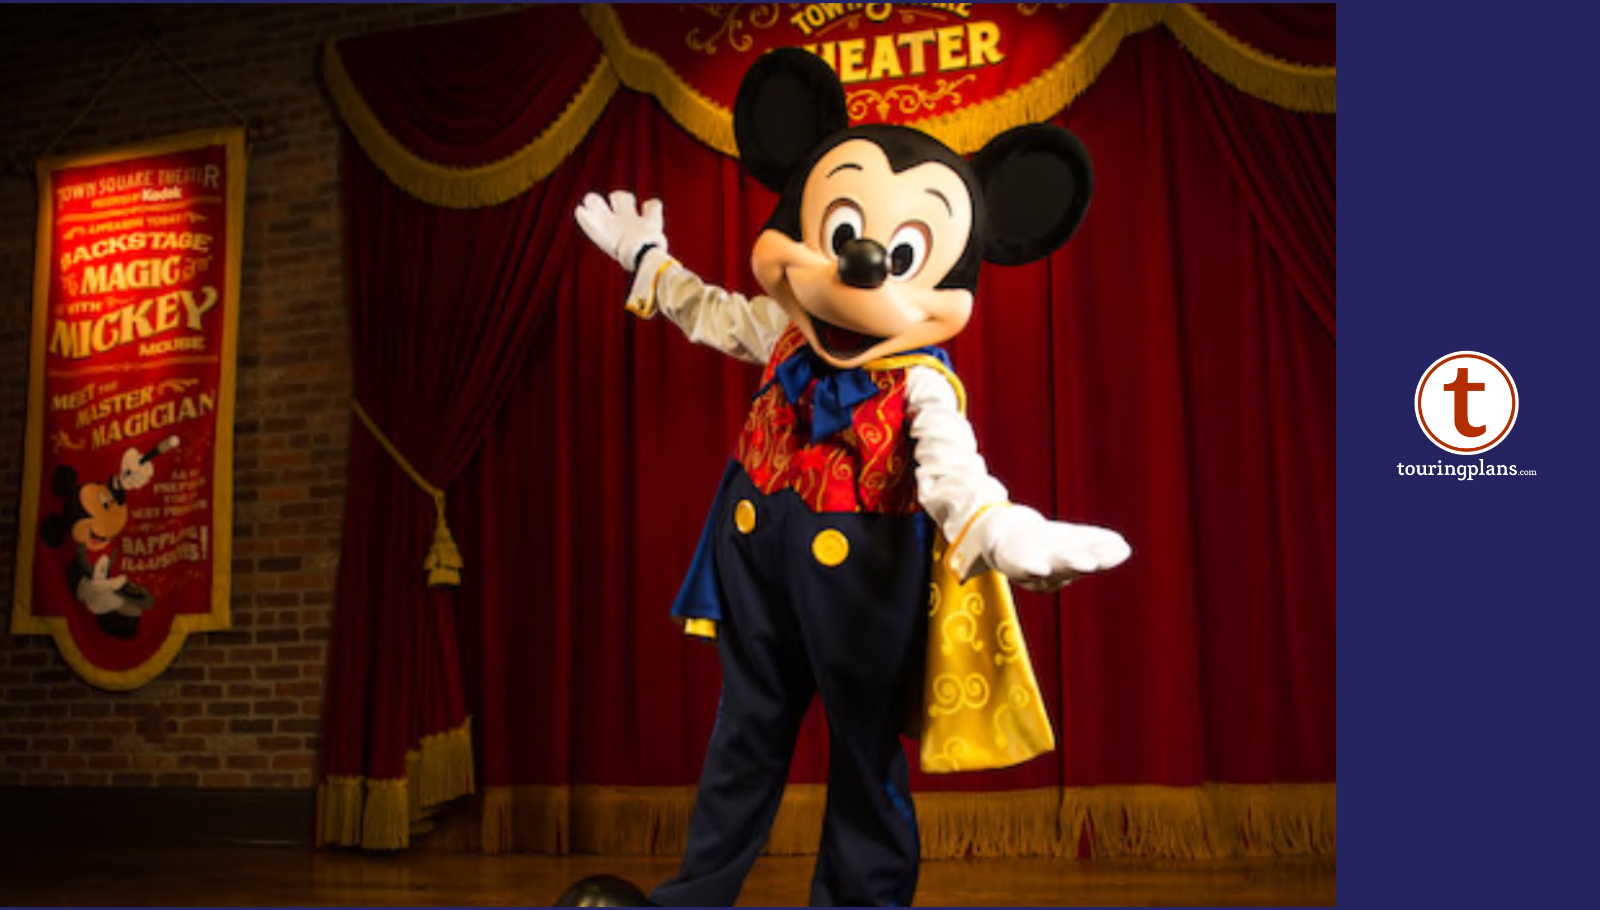 Disney Characters: Tips for Breakfasts and Meet & Greets - Disney